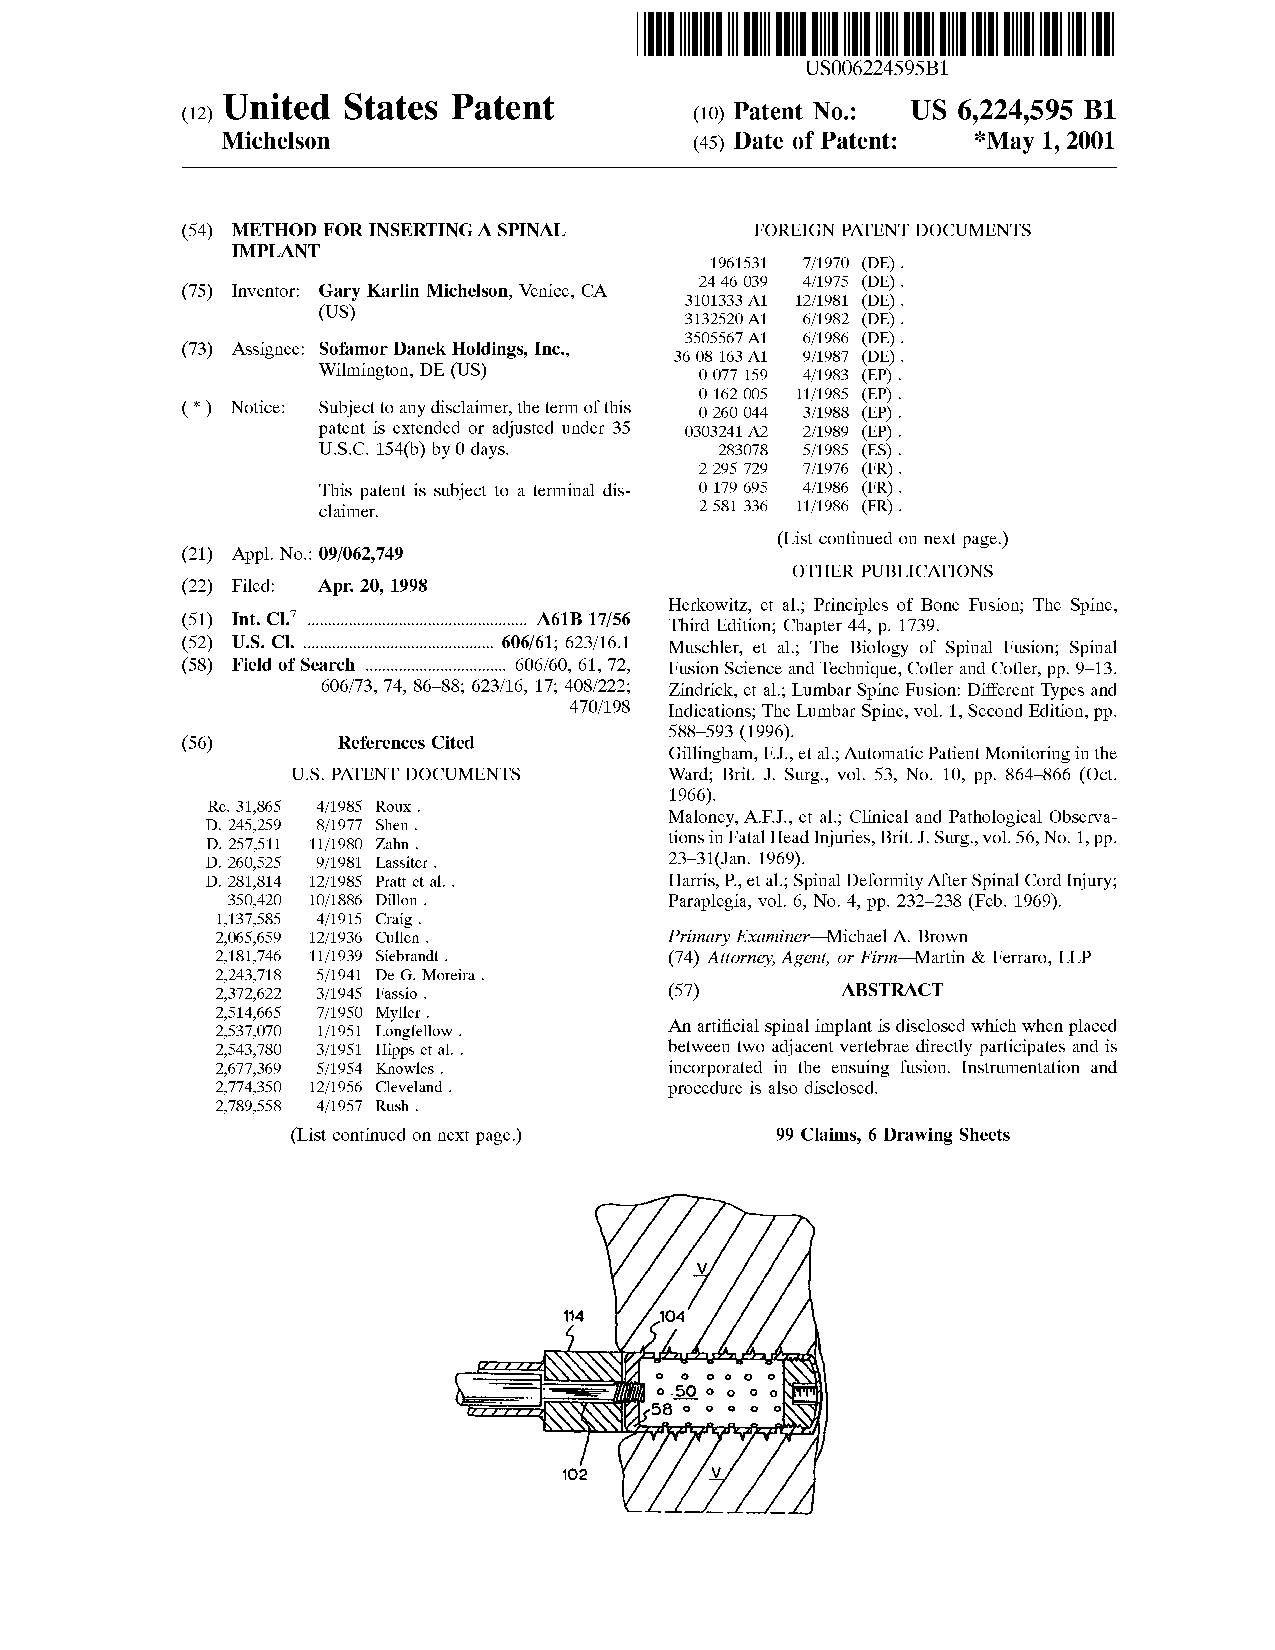 Method for inserting a spinal implant - Patent 6,224,595